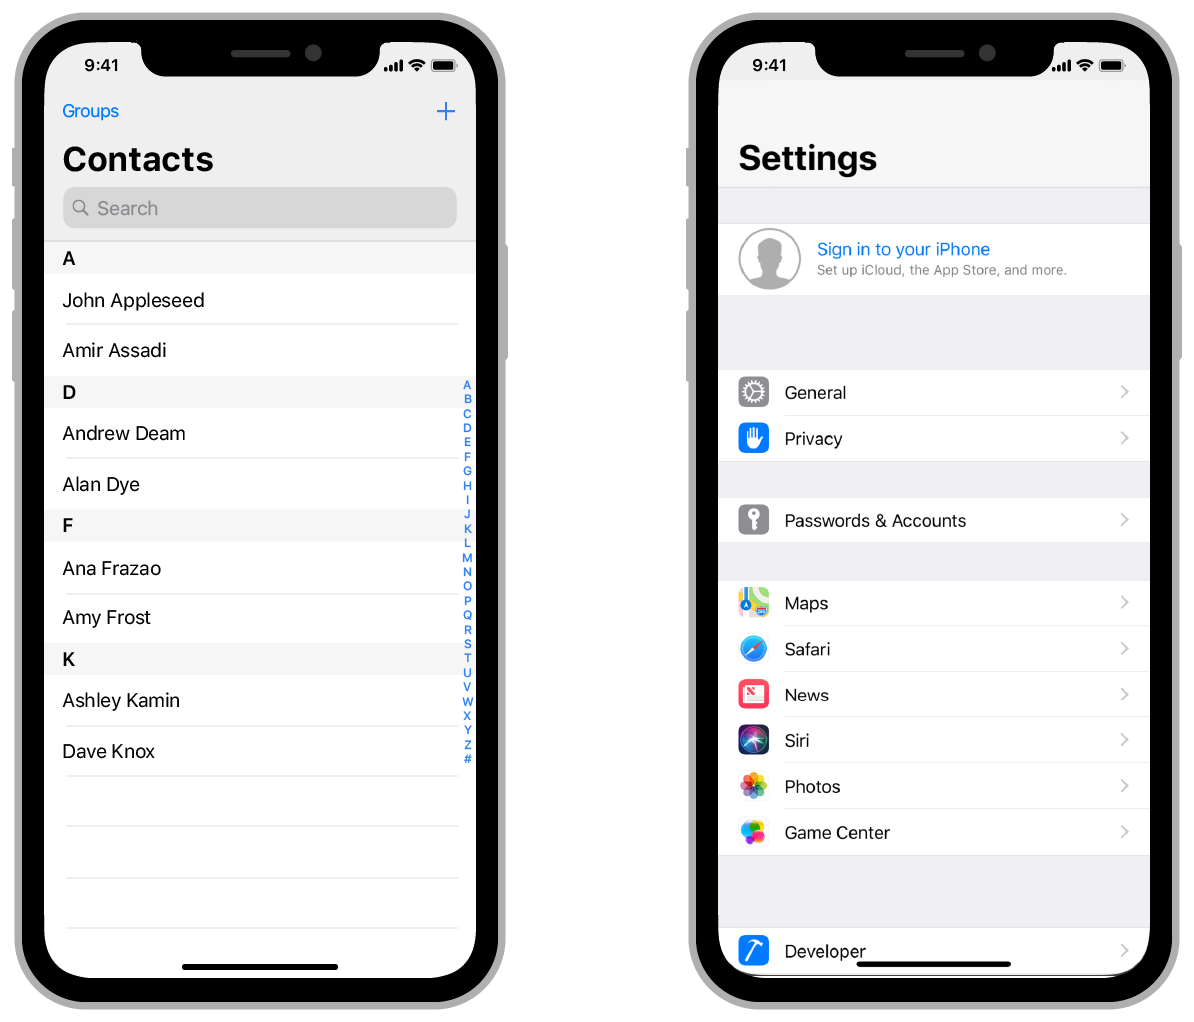 Illustration showing the Contacts app and Settings app. The Contacts app uses a table to organize the user's individual contacts in a scrolling list. The Settings app displays different groups of settings in a scrolling list.